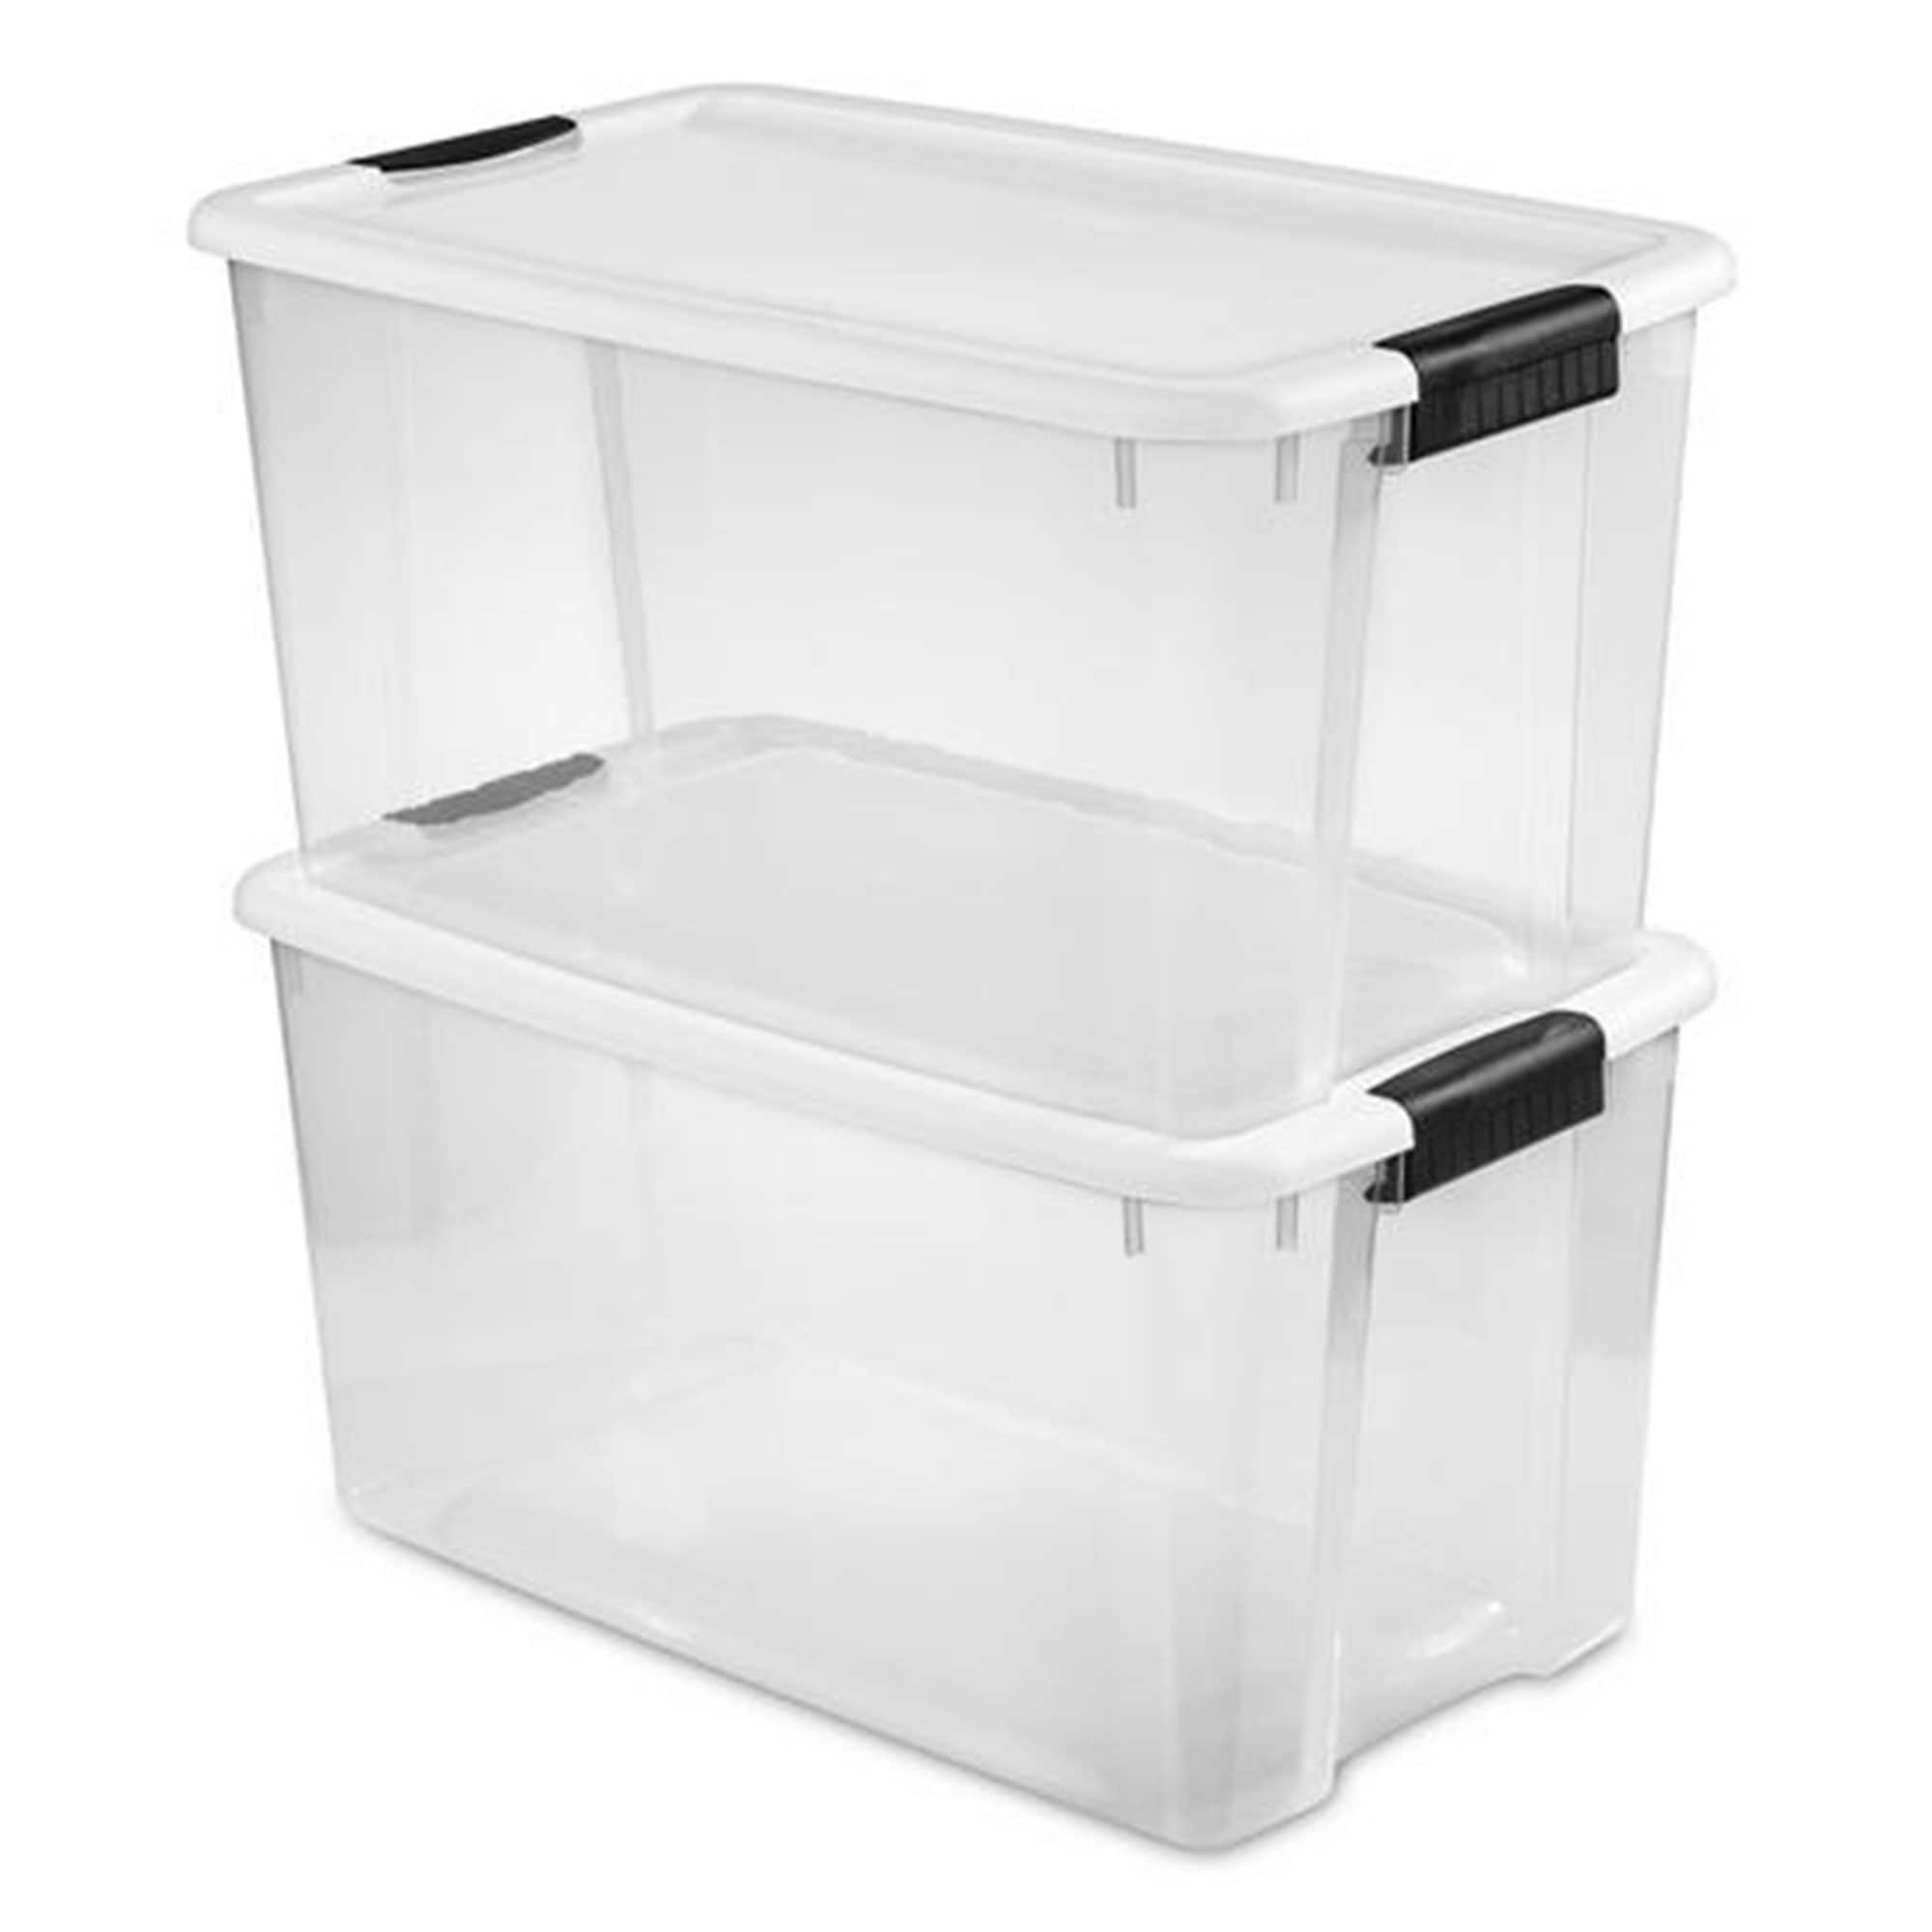 https://ak1.ostkcdn.com/images/products/is/images/direct/581cb374ed92d6bf608ccf94a37dd577af88c513/Sterilite-70-Qt-Clear-Plastic-Stackable-Storage-Bin-w--White-Latch-Lid%2C-4-Pack.jpg